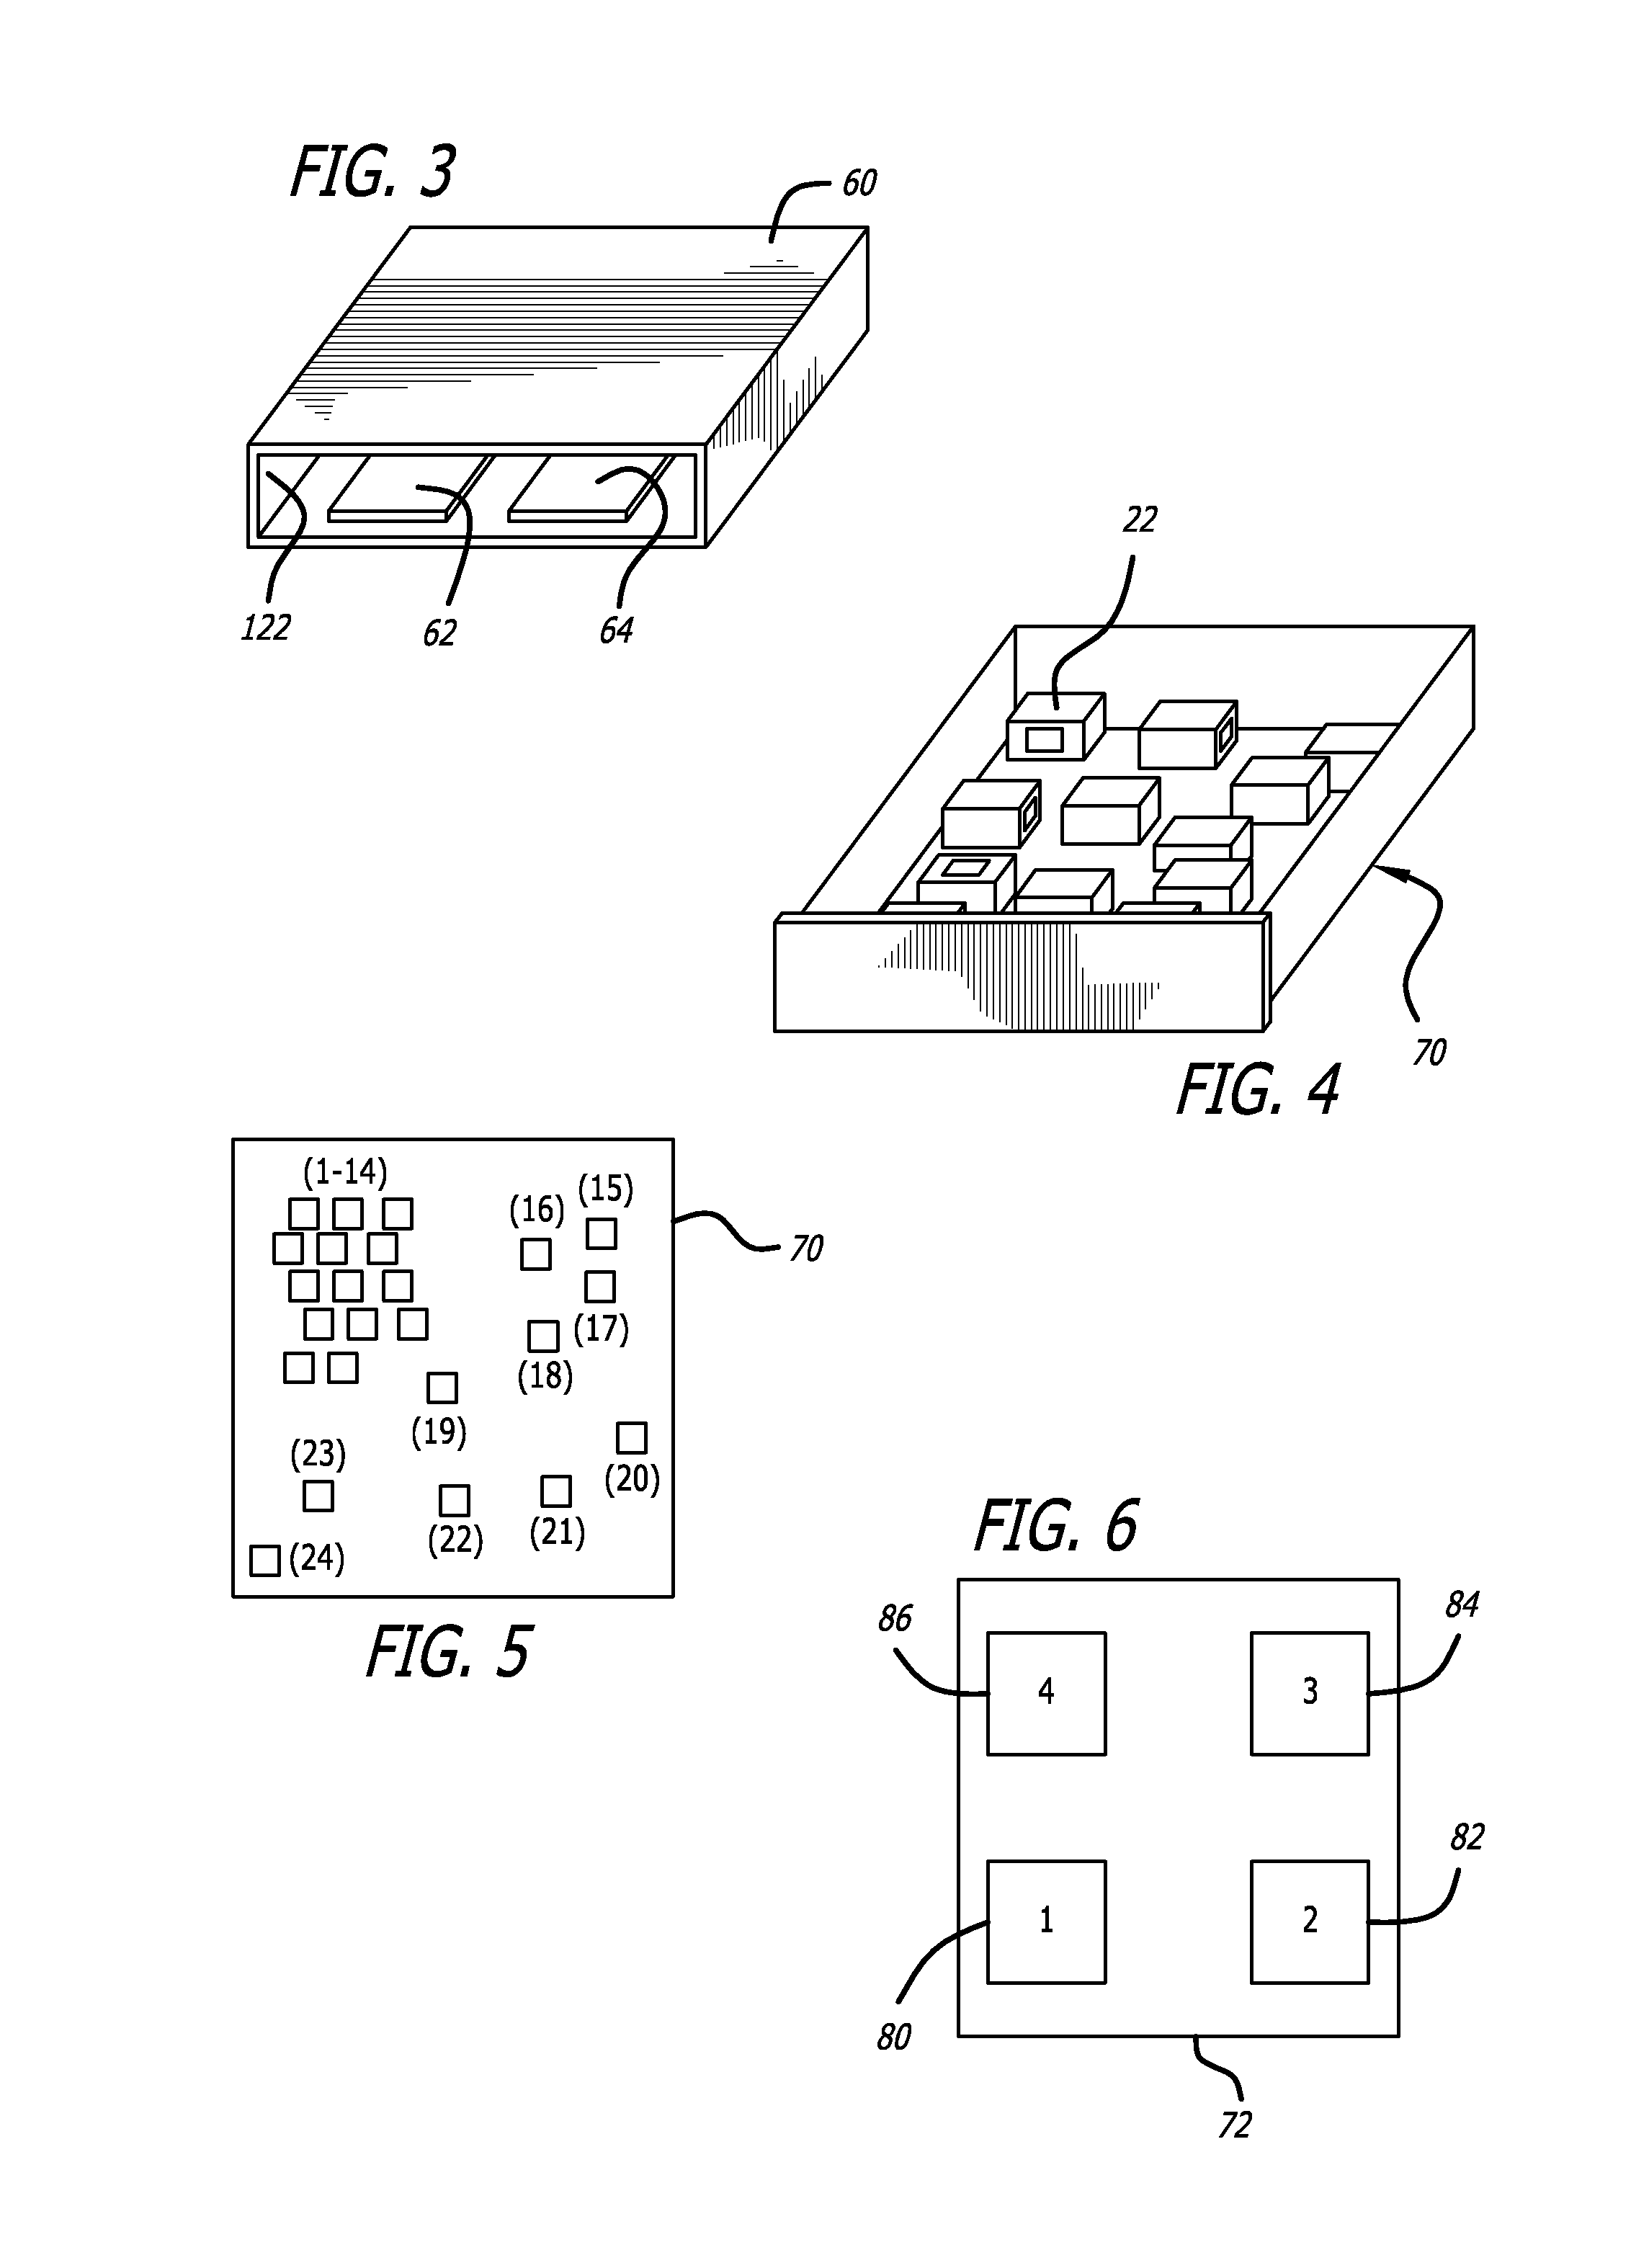 System and method of optimizing the process of identifying items tagged with RFID tags in an enclosed shielded space